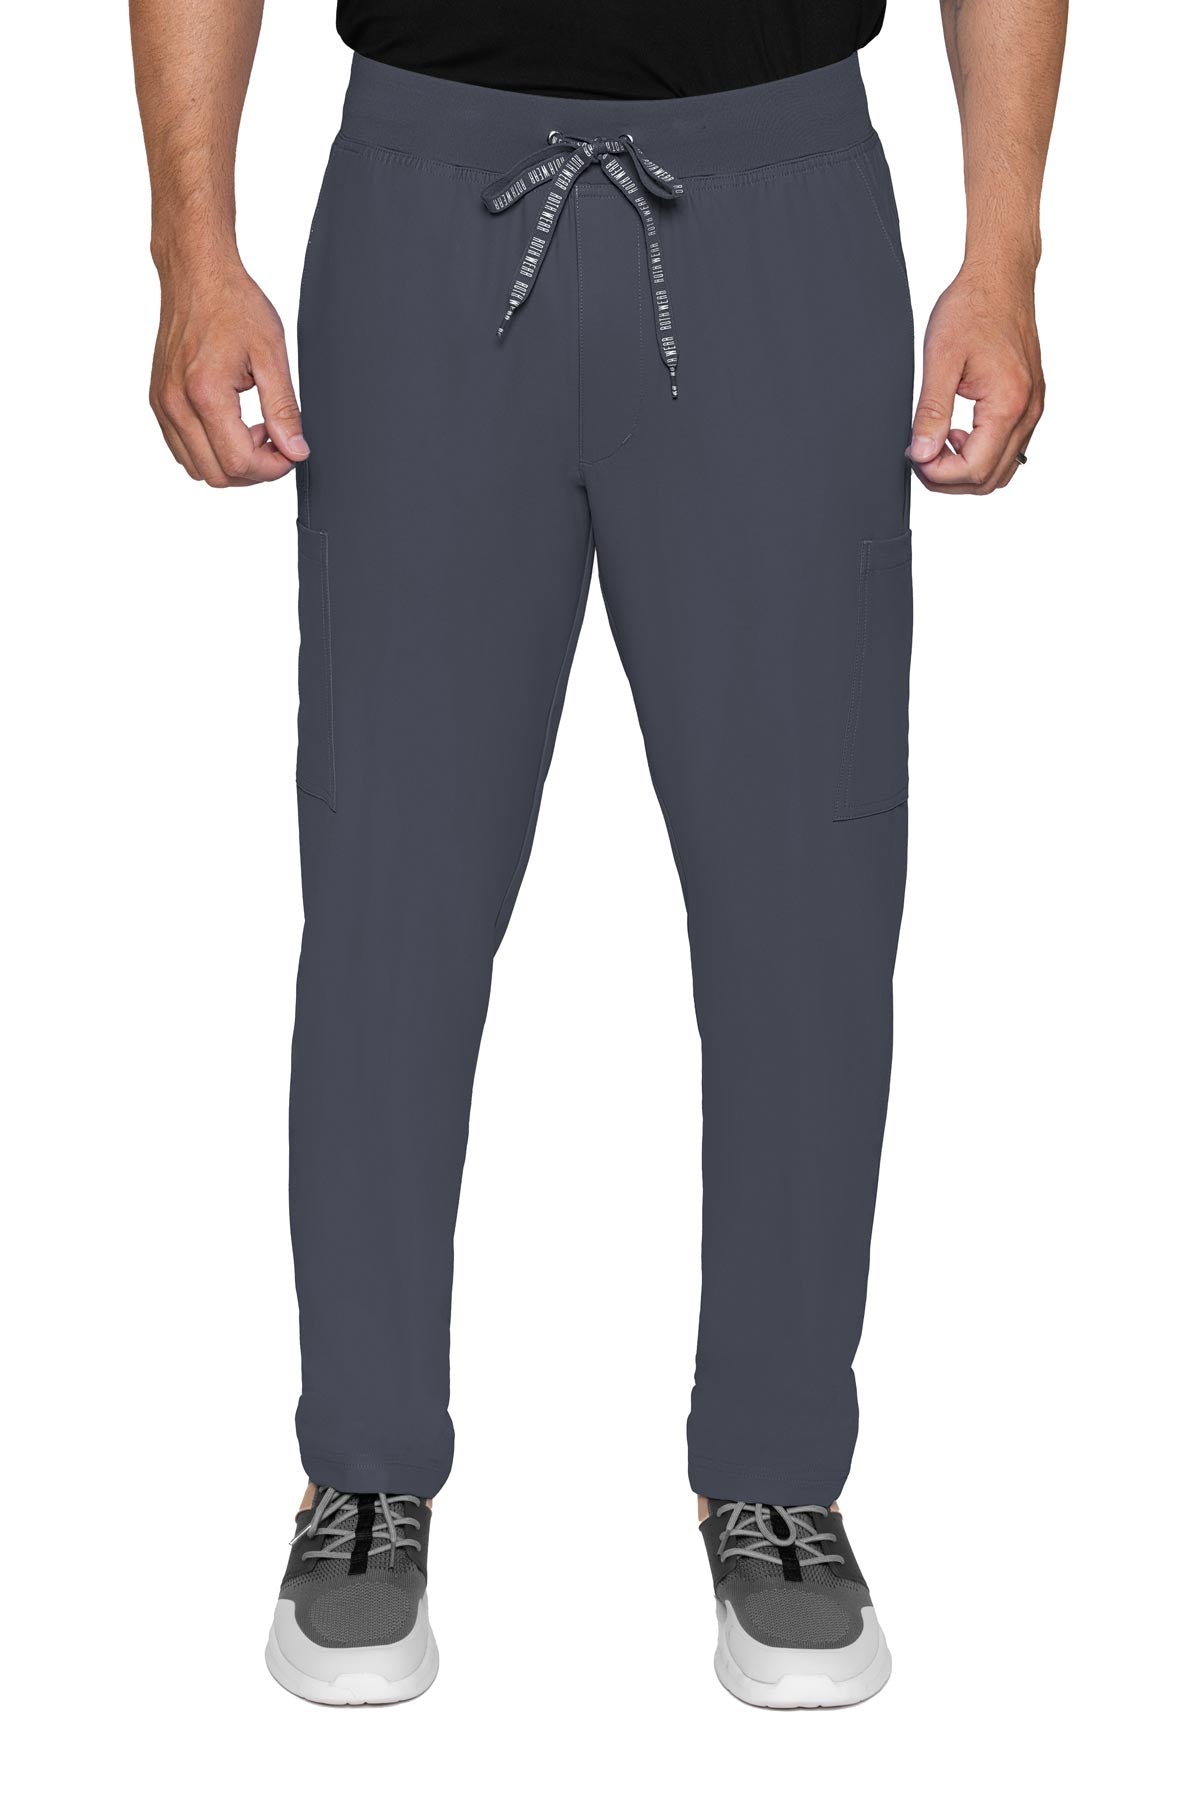 Peaches Pewter PANT